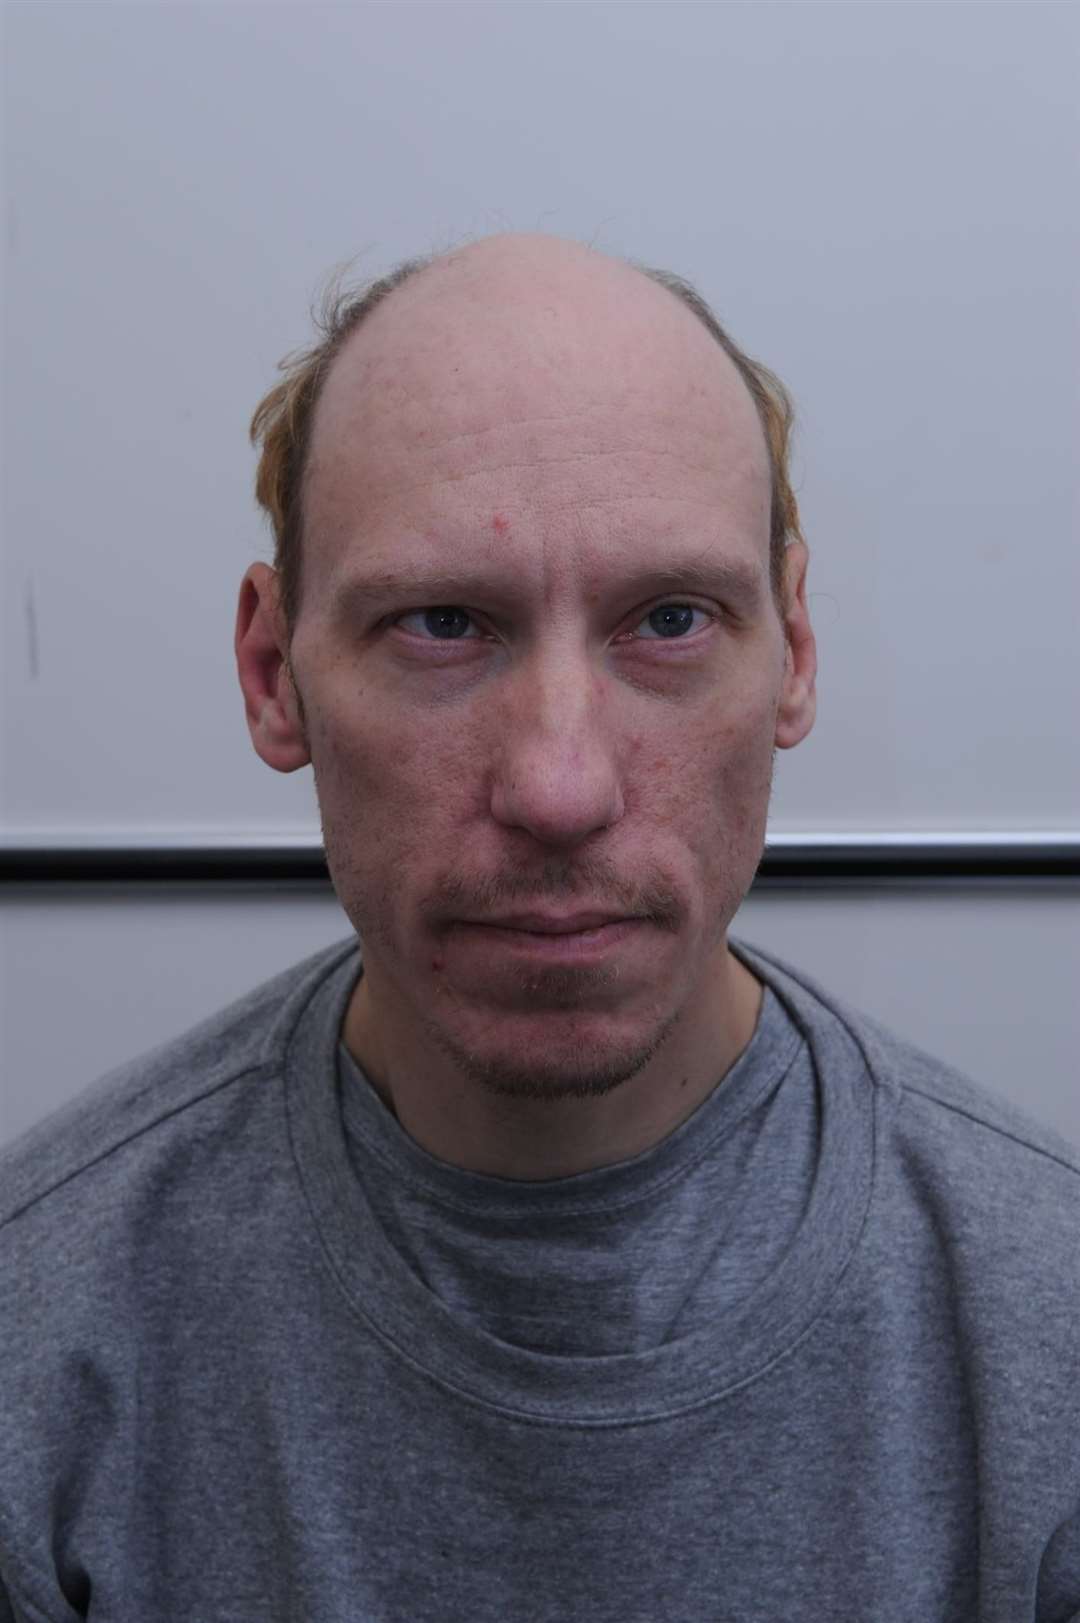 Serial killer Stephen Port was given a whole life term in 2016 for the murders of four young men – Daniel Whitworth, 21, Anthony Walgate, 23, Gabriel Kovari, 22, and 25-year-old Jack Taylor